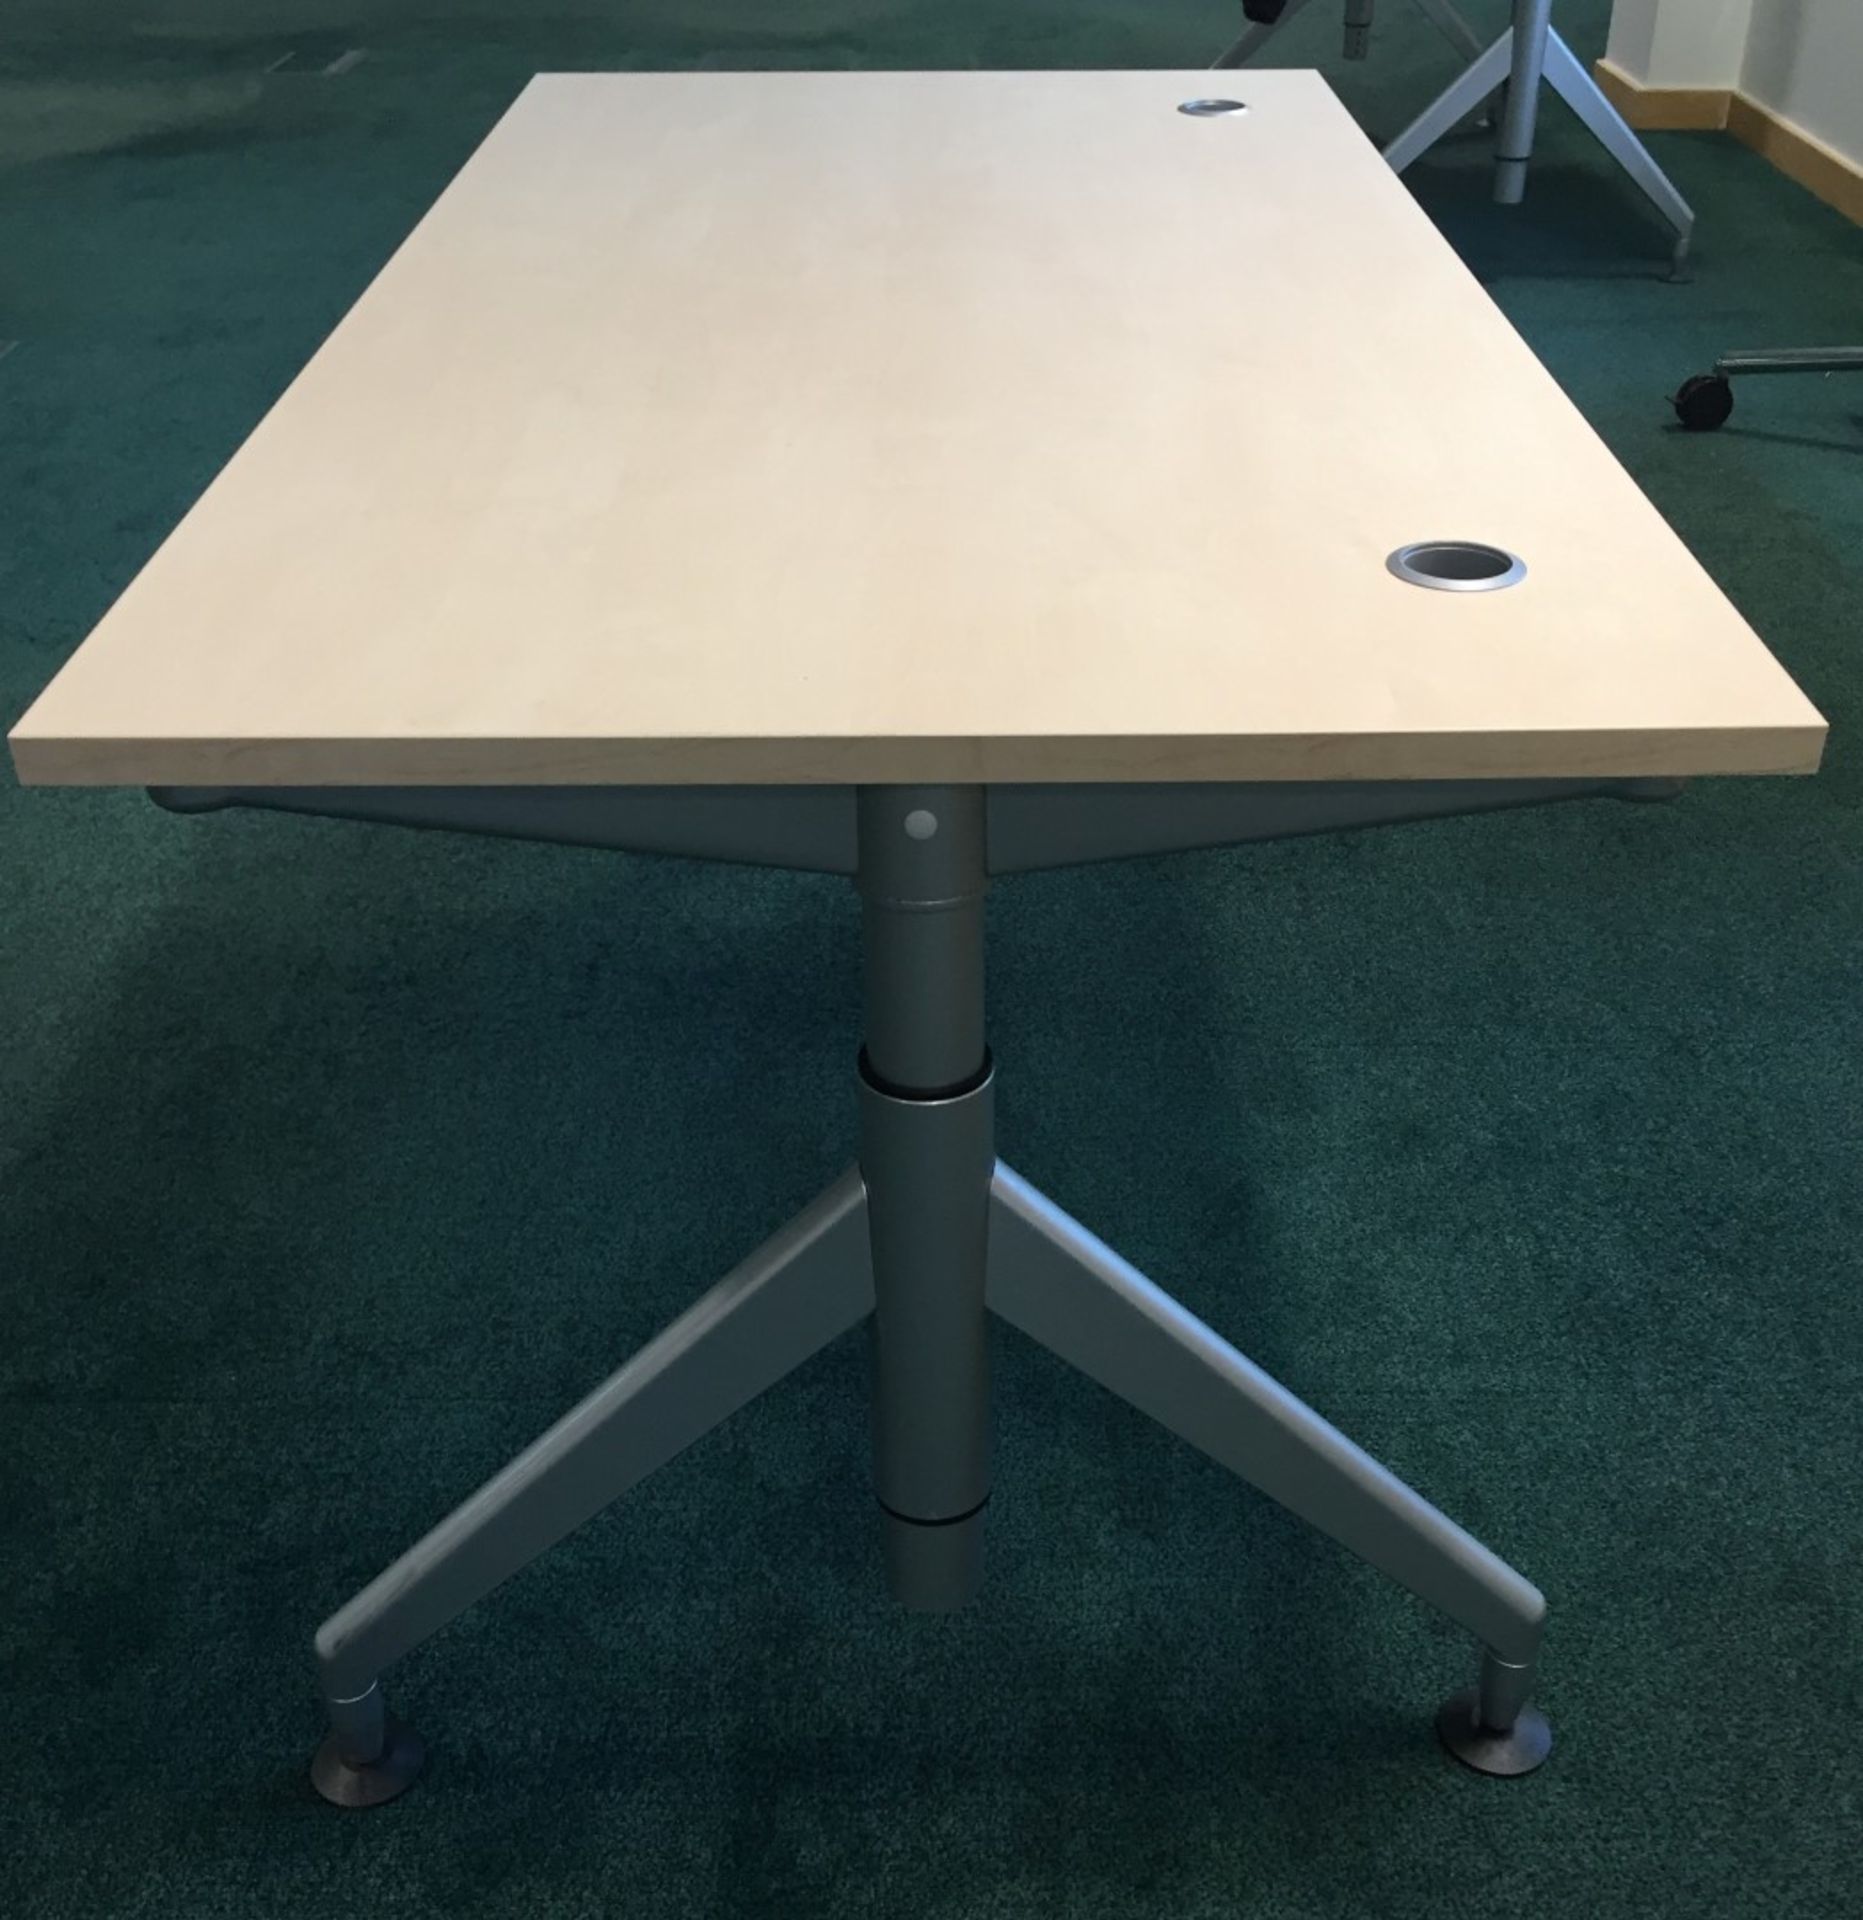 1 x Modern Rectangular Sit to Stand Office Desk With Height Adjustable Legs and a Light Maple Finish - Image 2 of 6